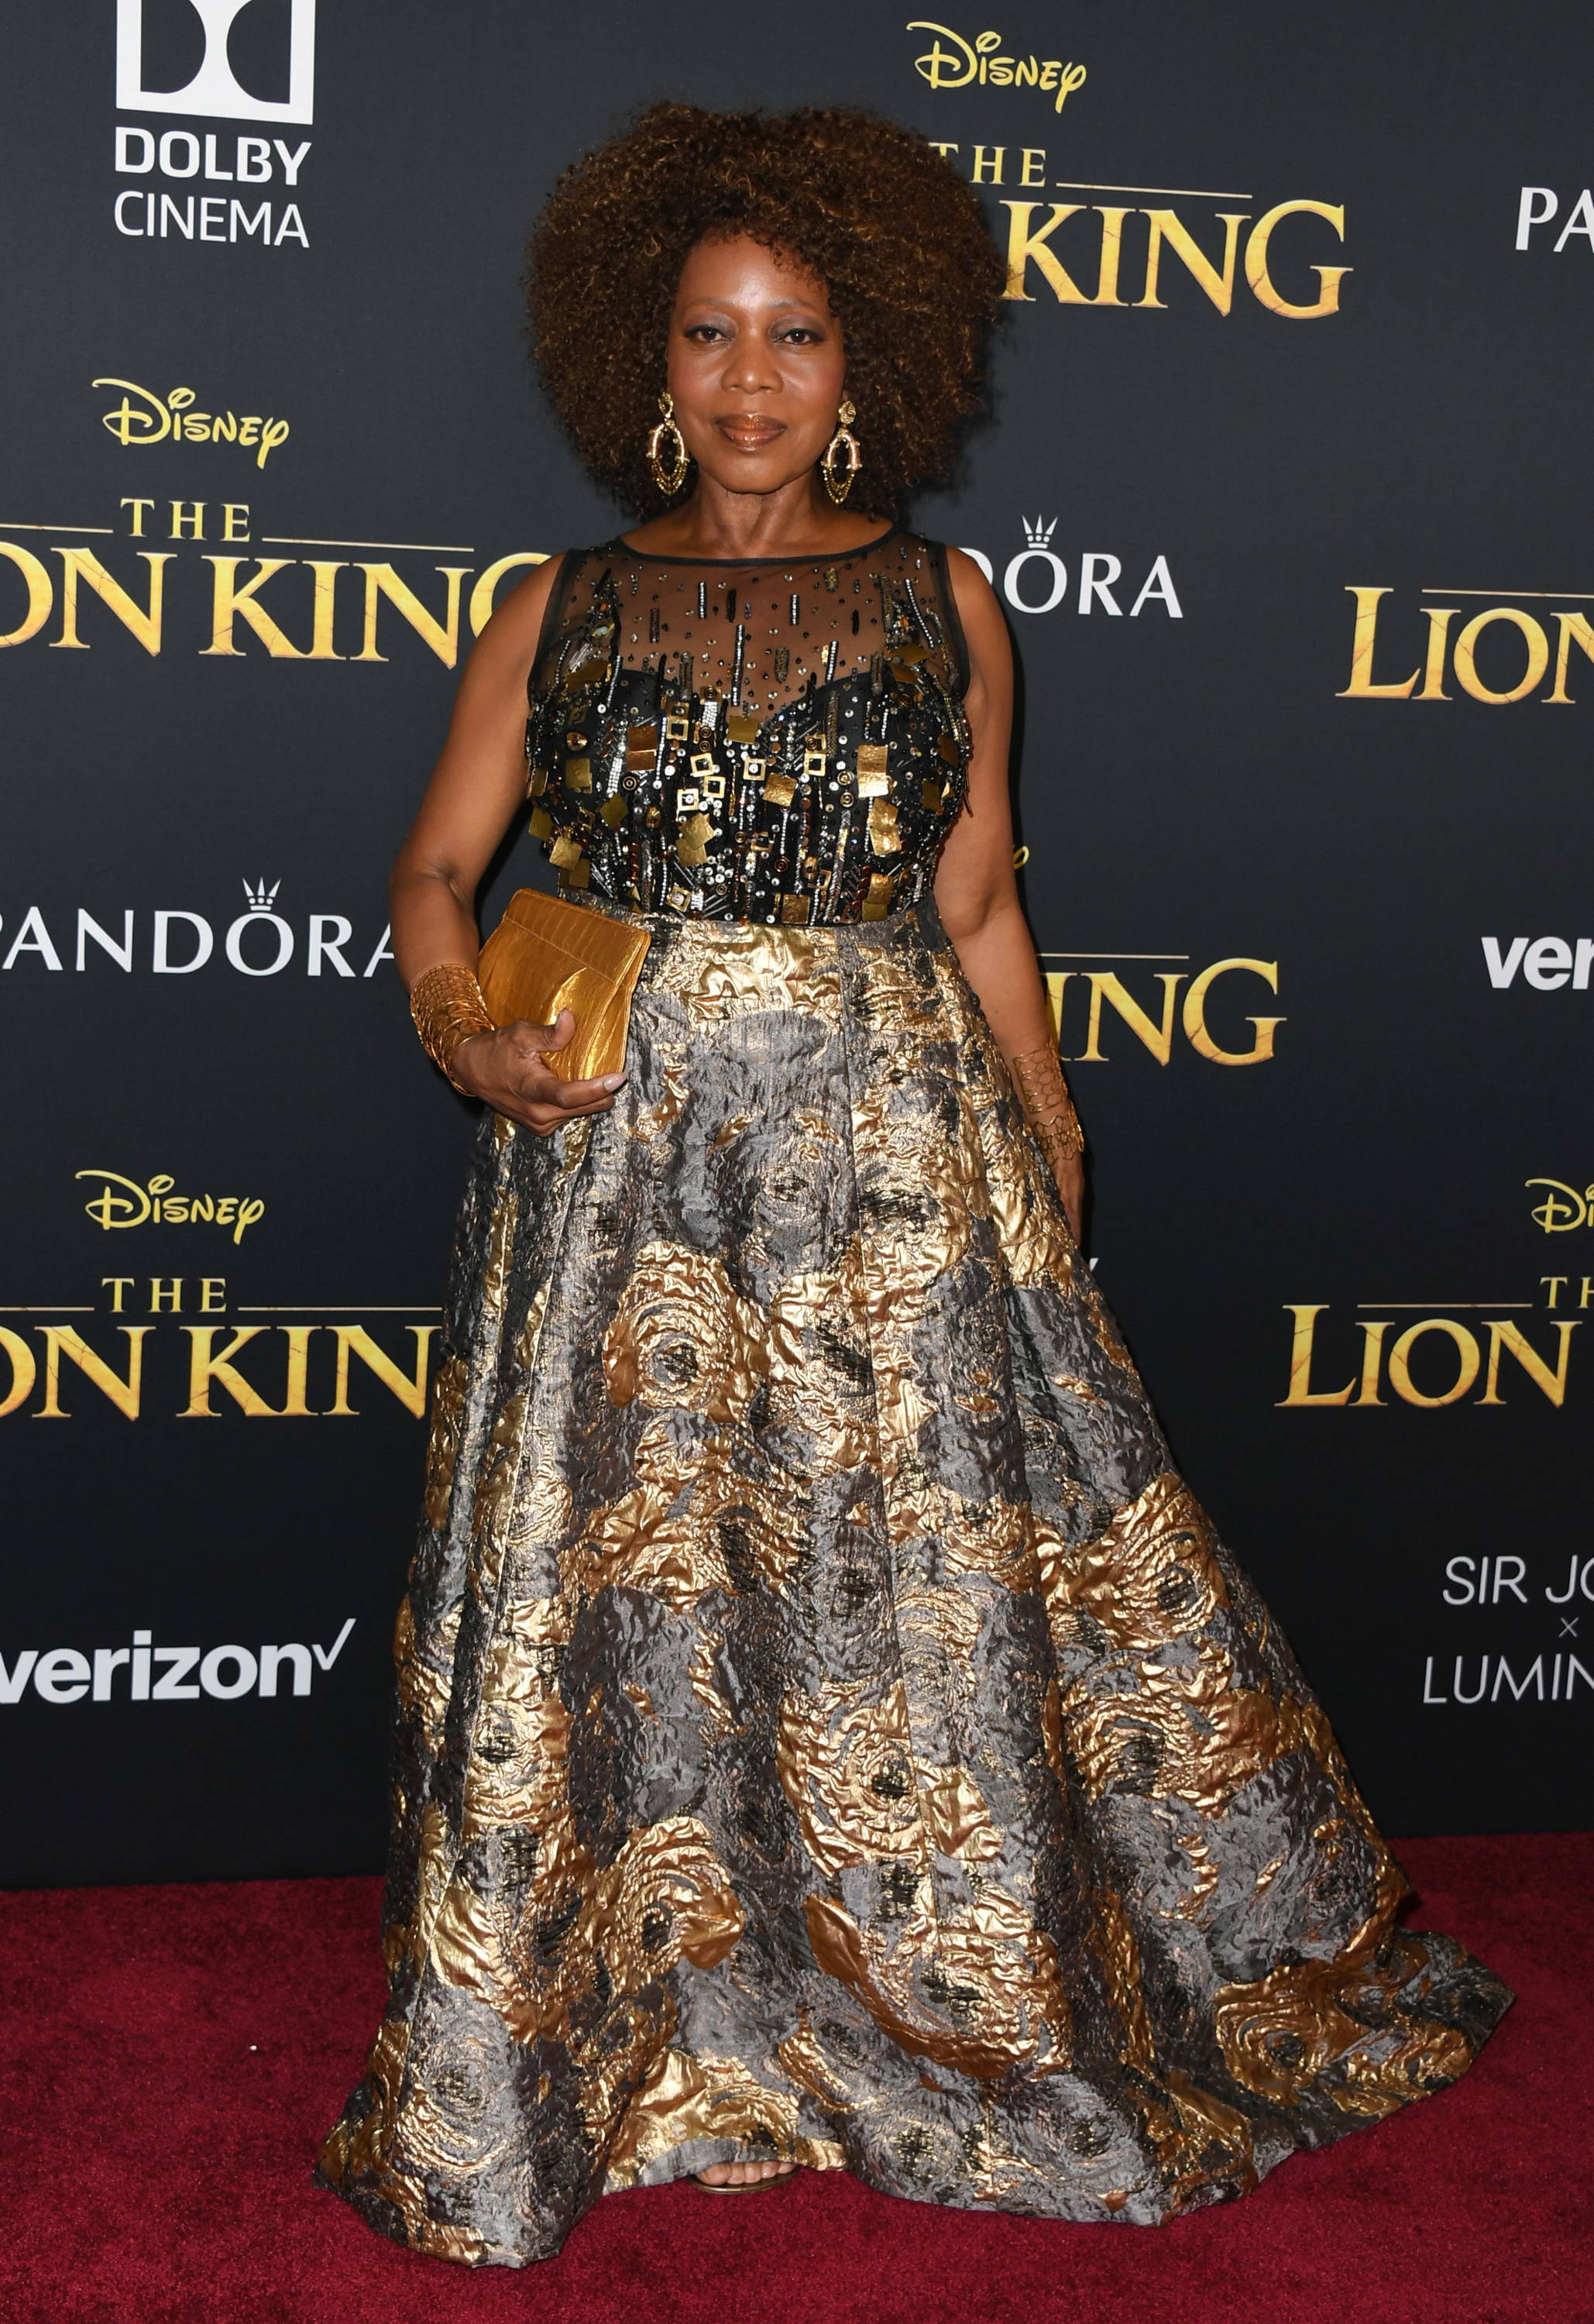 Alfre Woodard was styled by the fabulous stylists from our Los Angeles Badgley Mischka boutique, for the Lion King Red carpet premiere! She looked absolutely stunning wearing Badgley Mischka Haute Couture!